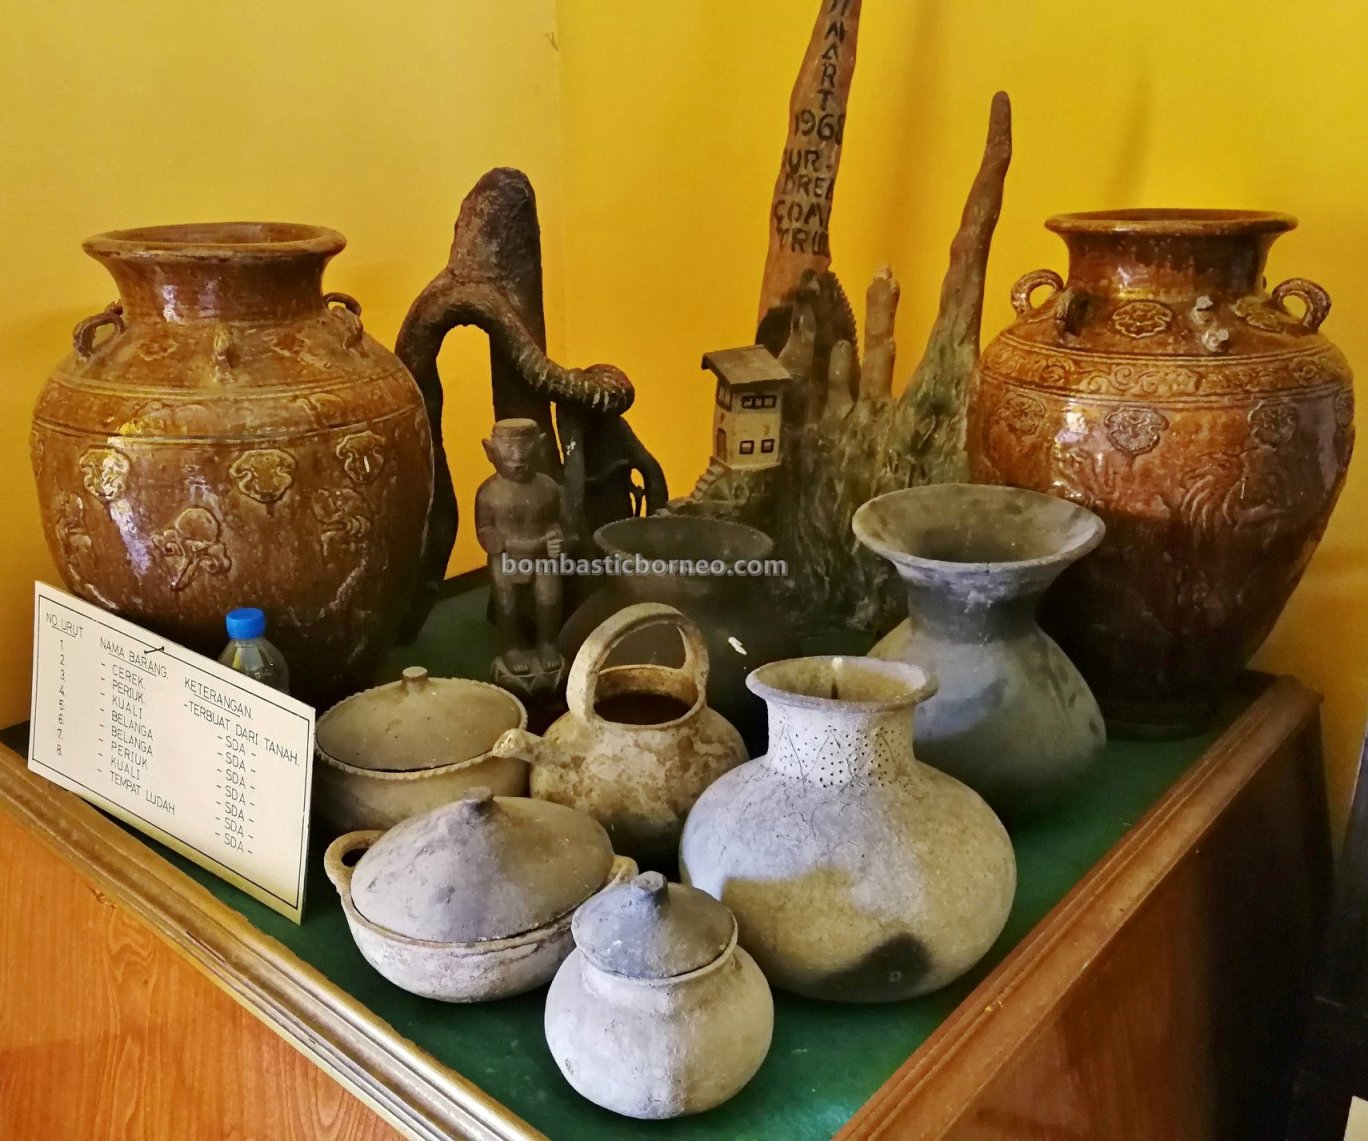 museum, antique, artifacts, Palace, Keraton, Malay Sultanate, Borneo, Indonesia, Obyek wisata, Tourism, traditional, travel guide, cross border, 印尼新党皇宮, 婆羅洲西加里曼丹,